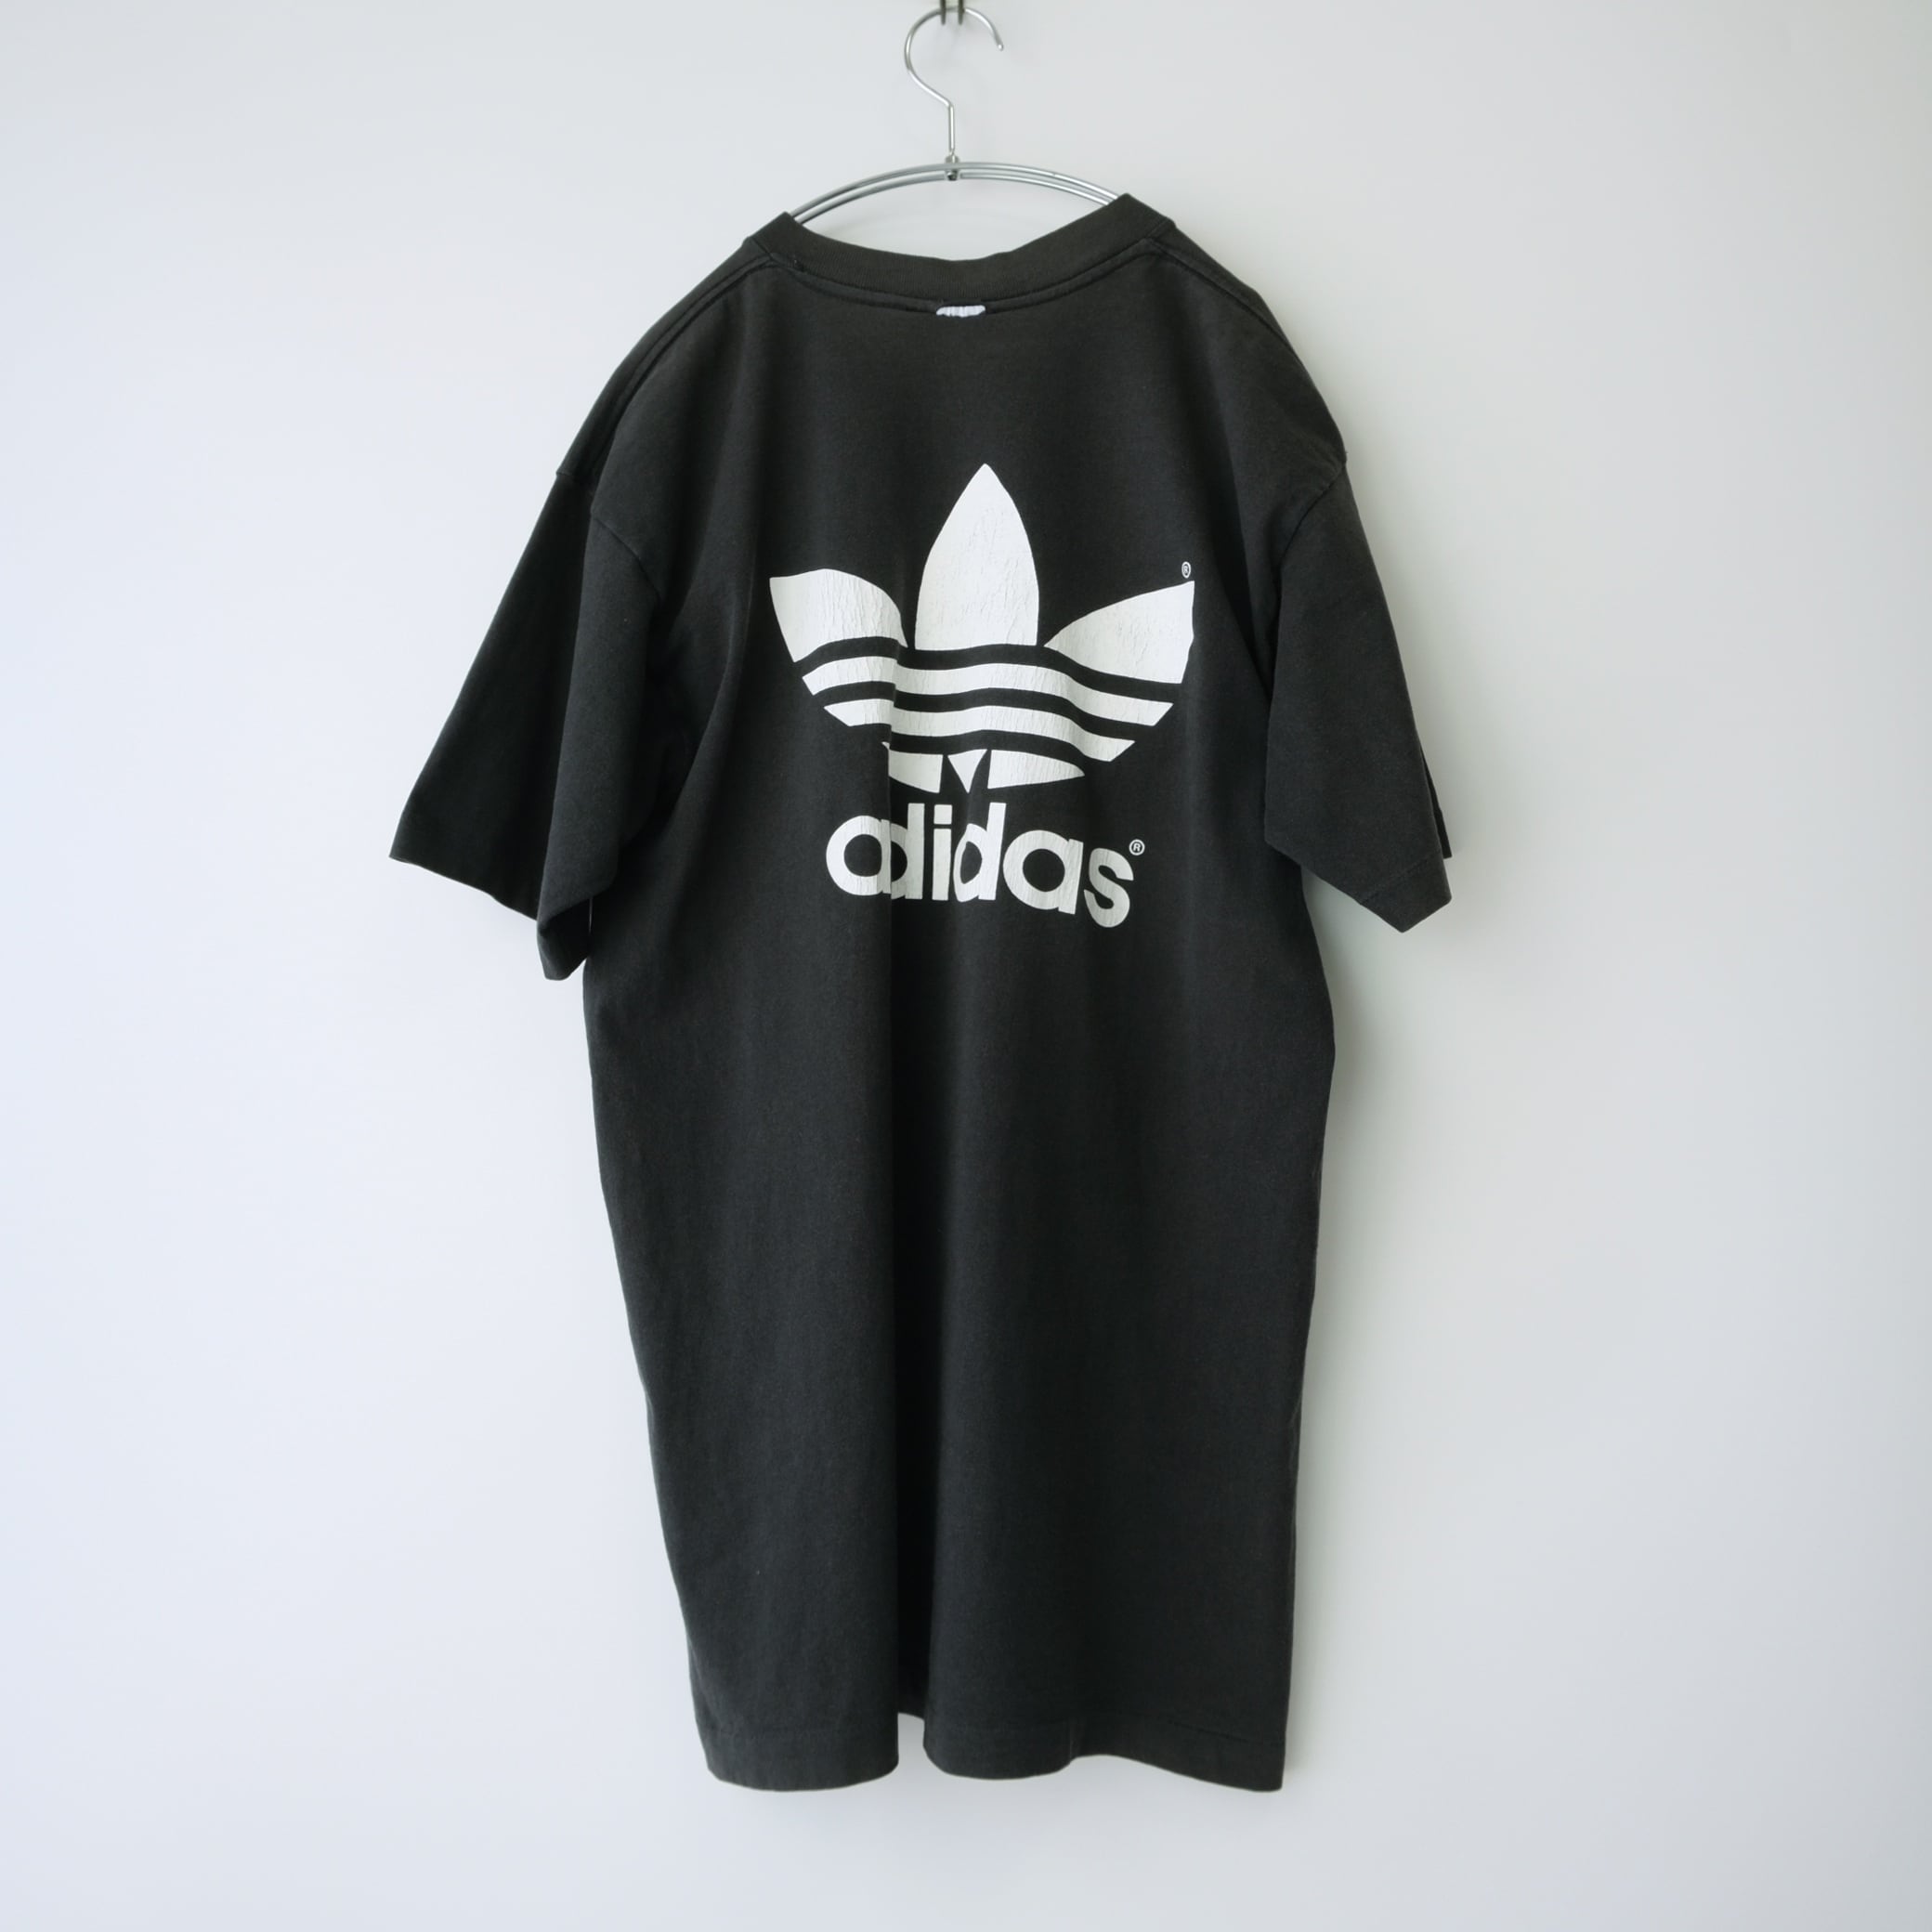 adidas】90's USA製 プリントロゴ半袖Tシャツ 黒 M | RE:FOUND